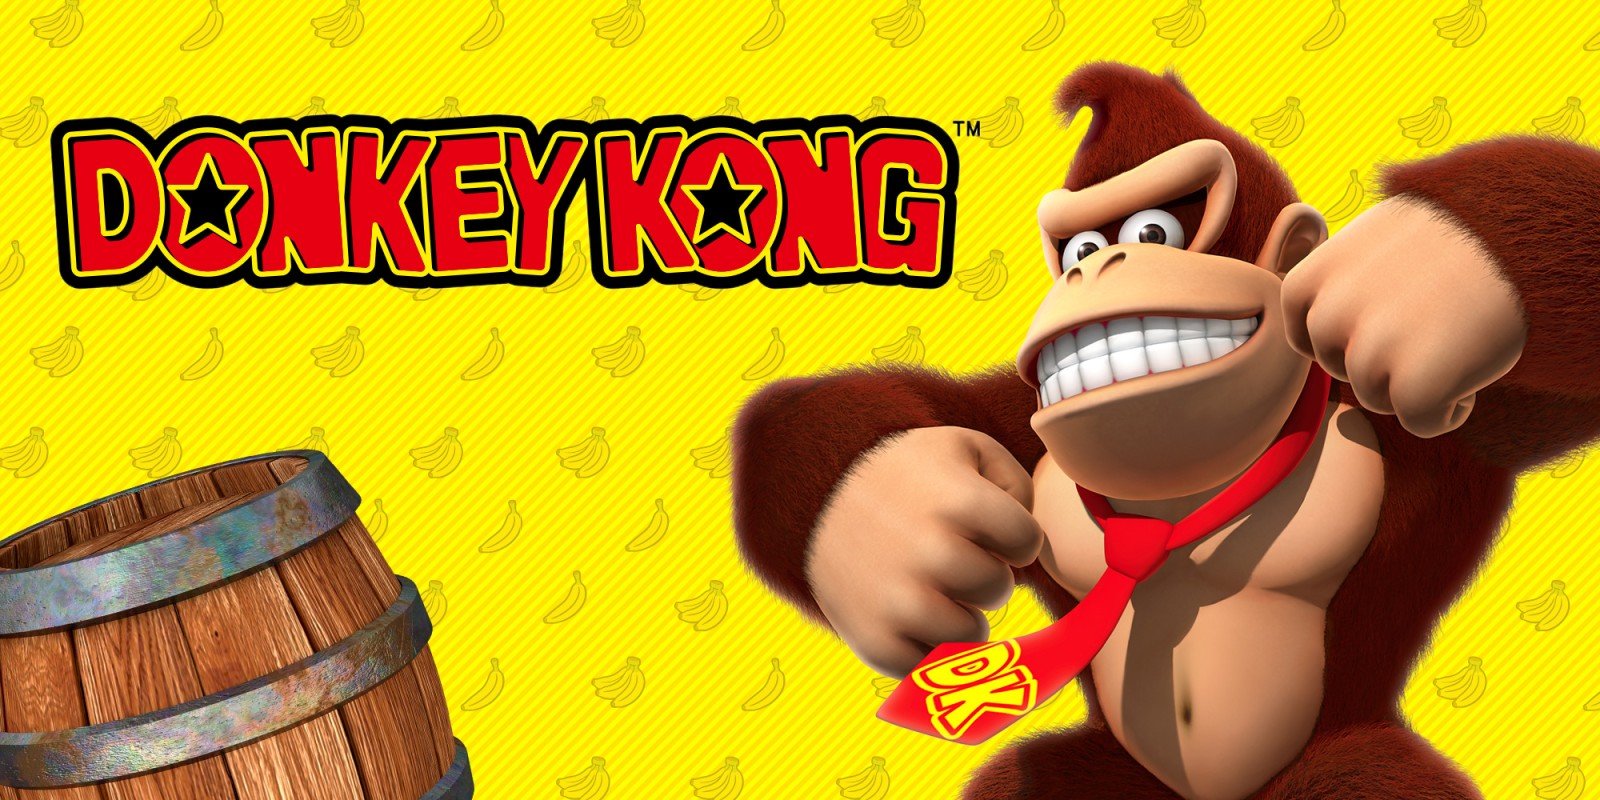 The Mario Odyssey team is working on a new Donkey Kong game, it's